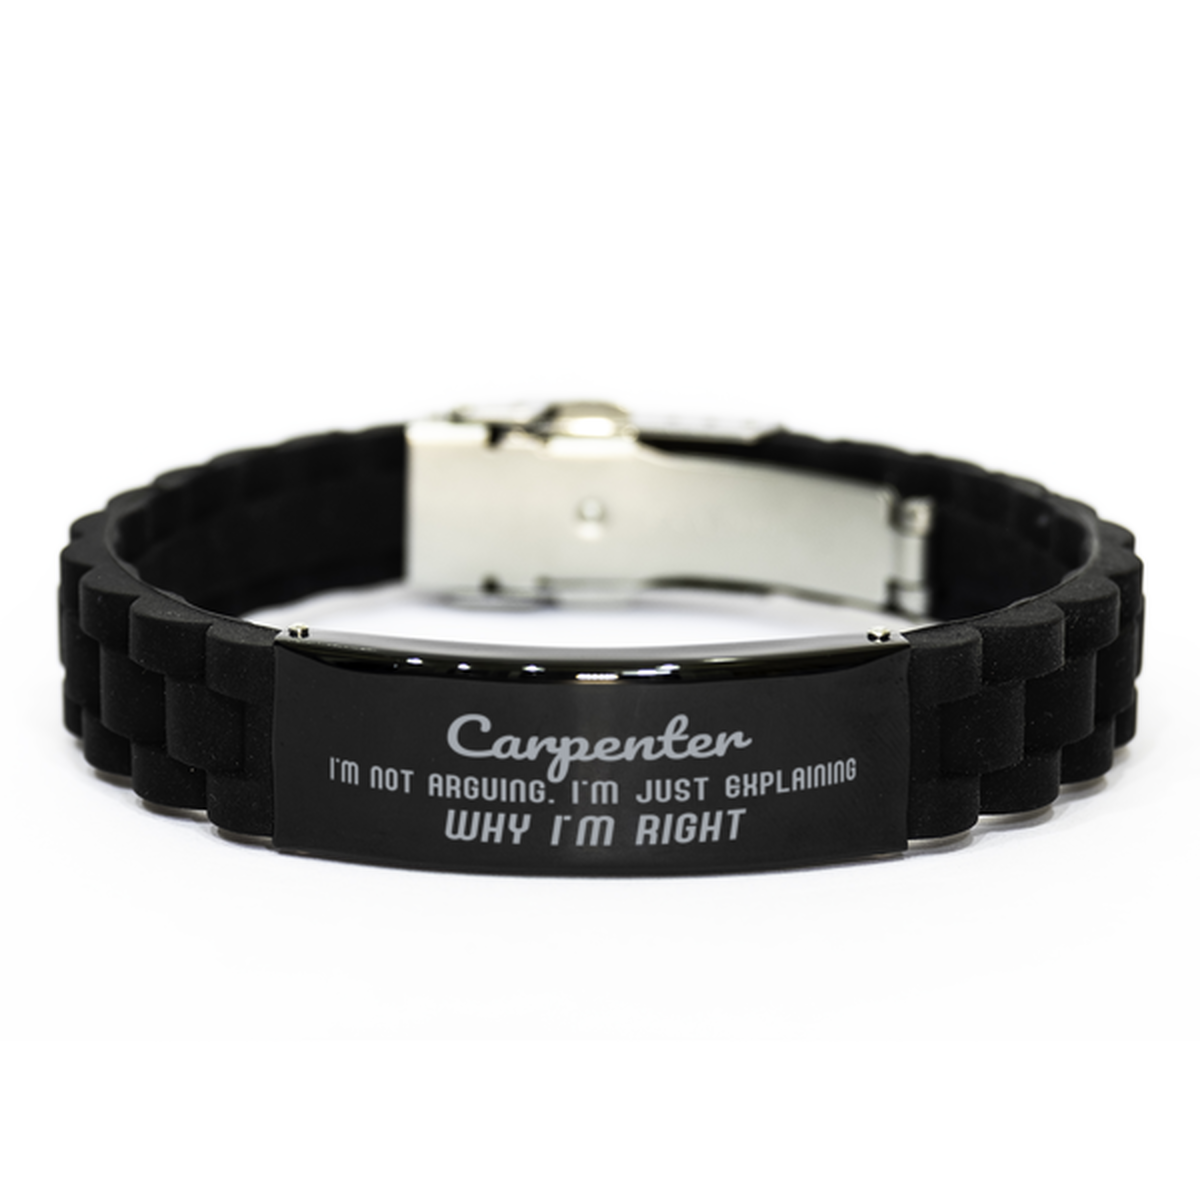 Carpenter I'm not Arguing. I'm Just Explaining Why I'm RIGHT Black Glidelock Clasp Bracelet, Funny Saying Quote Carpenter Gifts For Carpenter Graduation Birthday Christmas Gifts for Men Women Coworker